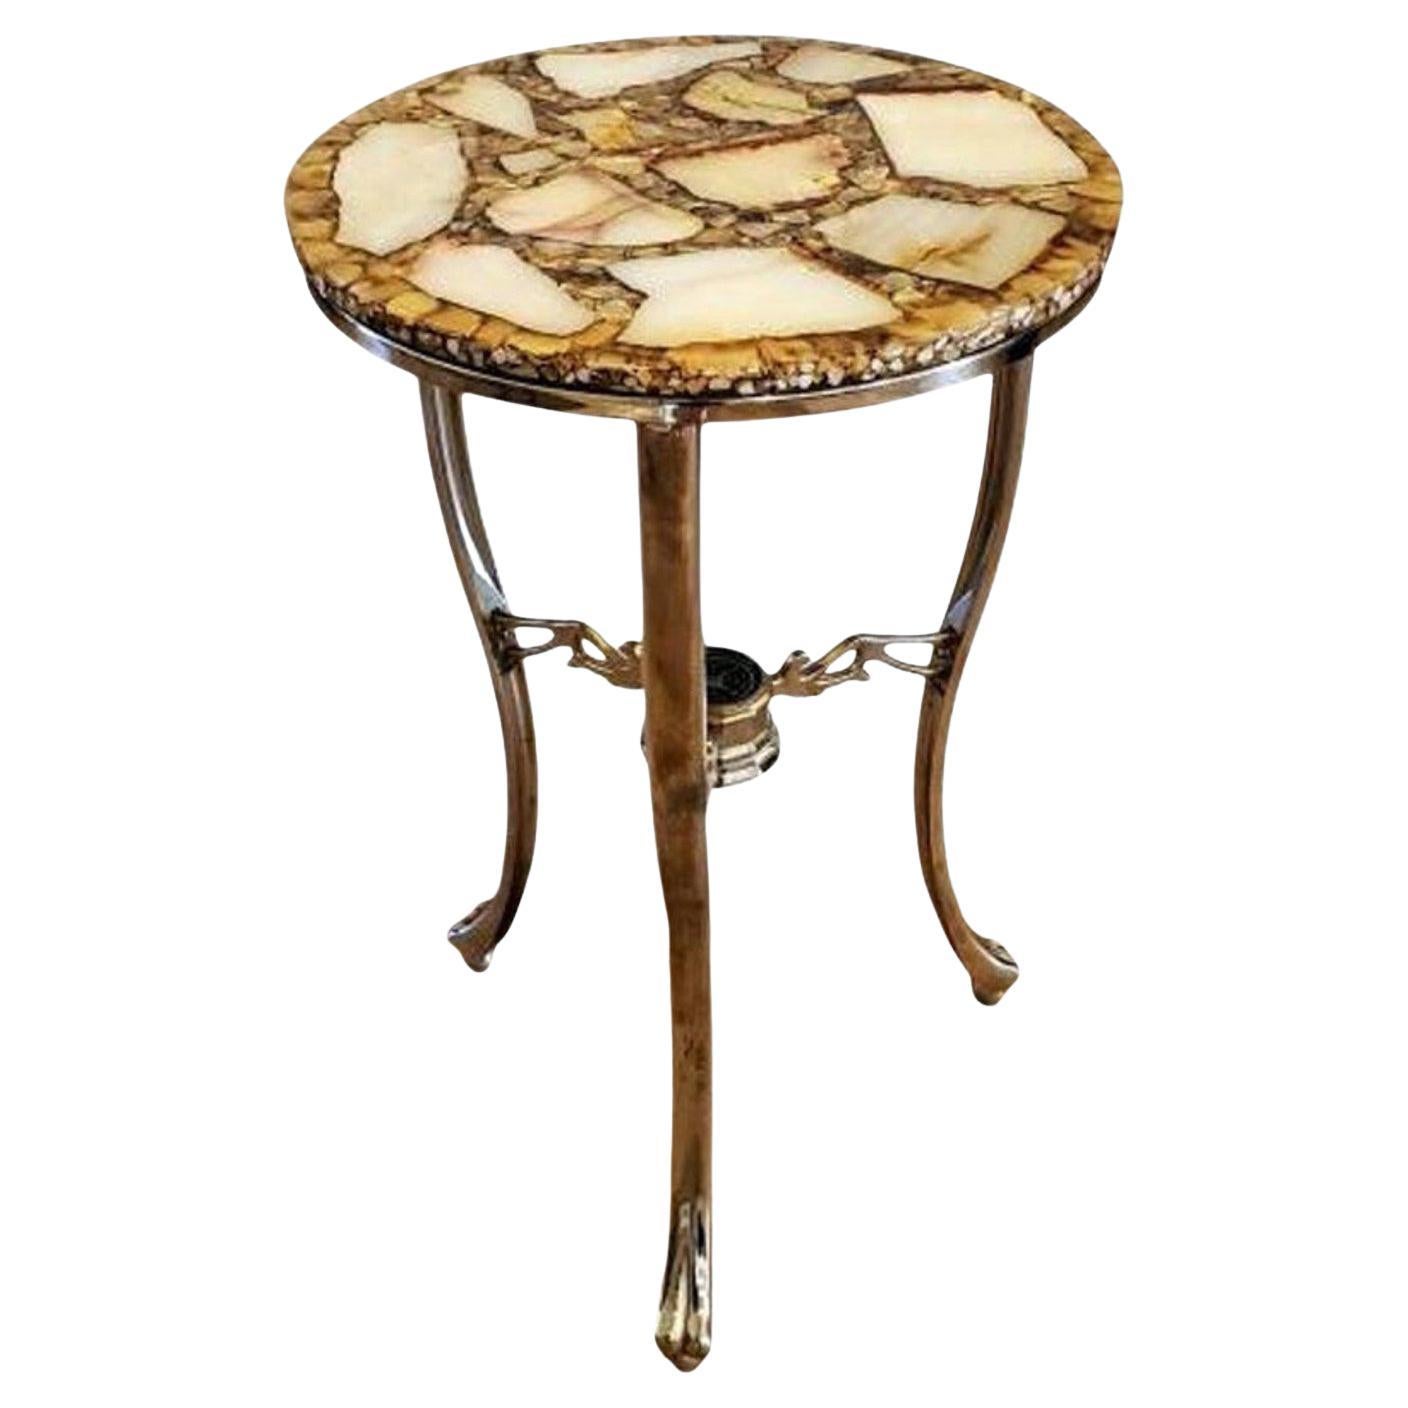 Modern Arturo Pani Style Agate Abalone Marble Compass Side Table For Sale